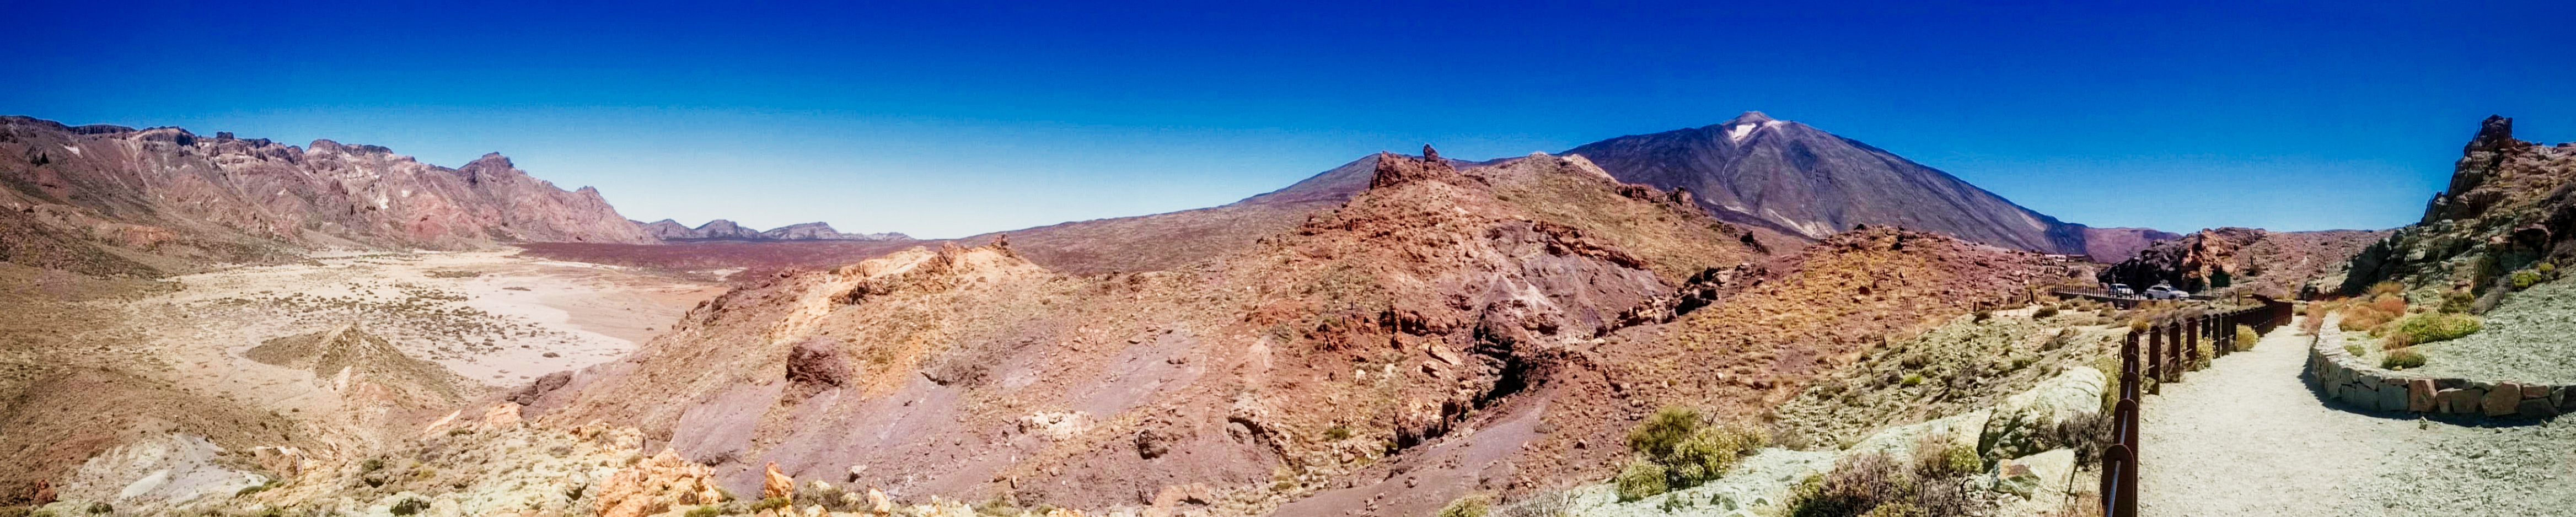 Eruptions on Mount Teide - Teide is Spain's highest mountain and also the third highest volcano in the world when measured from the seafloor